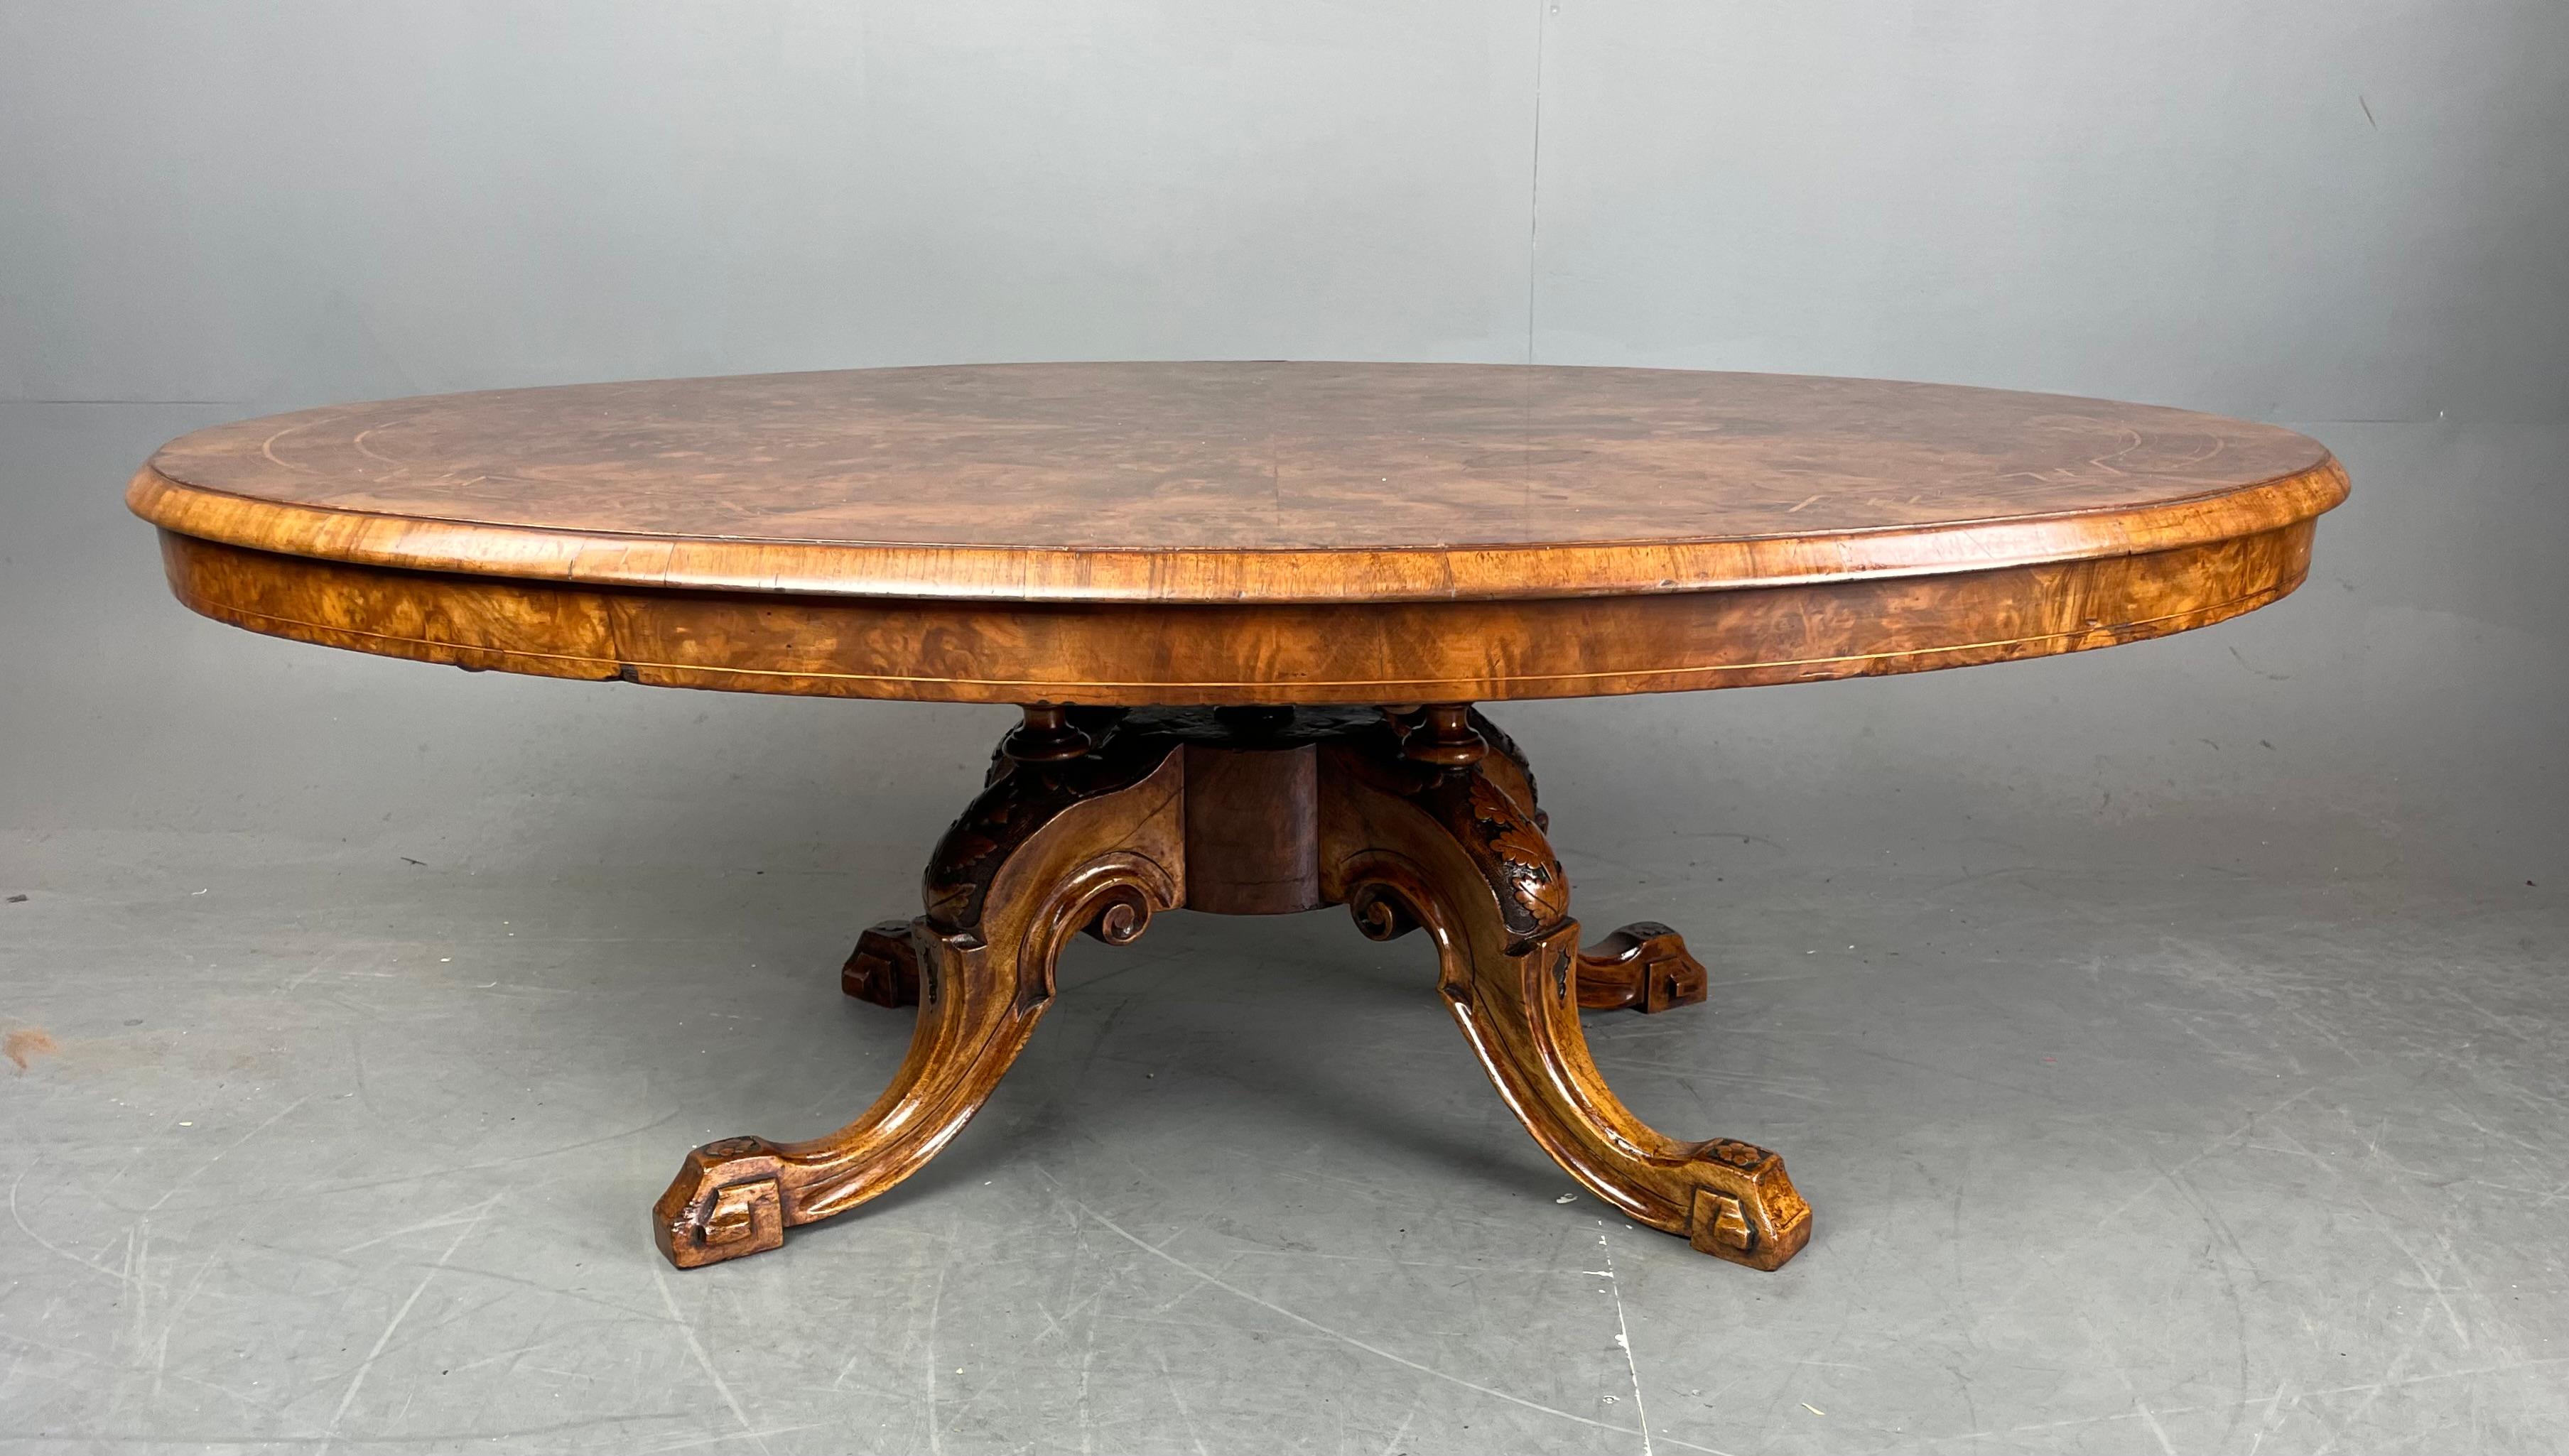 Wonderful large inlaid burr walnut coffee table .
The top has very good figured walnut with quality inlay detail ,it is a large size being 4ft 6 inches wide .
The table is in great condition ready for its new home .
 